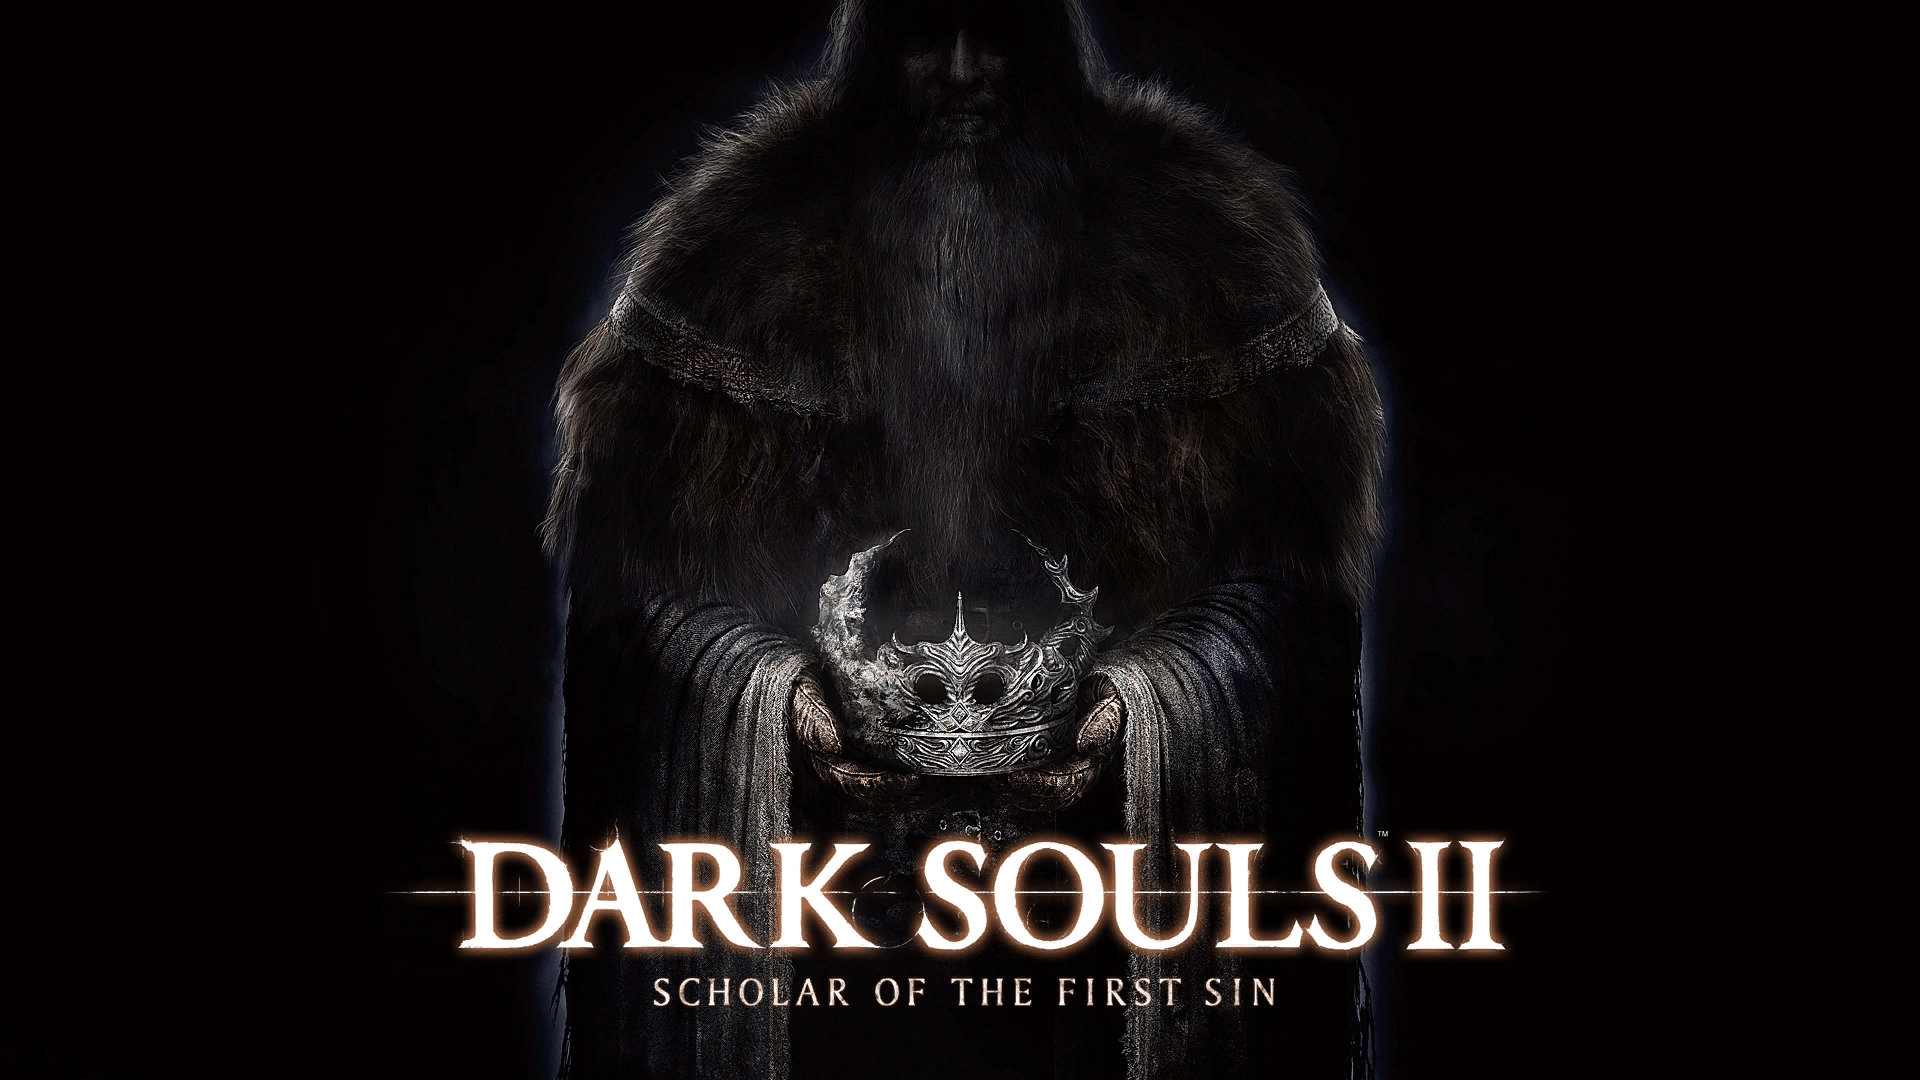 Guide for Dark Souls II: Scholar of the First Sin - Grave of Saints